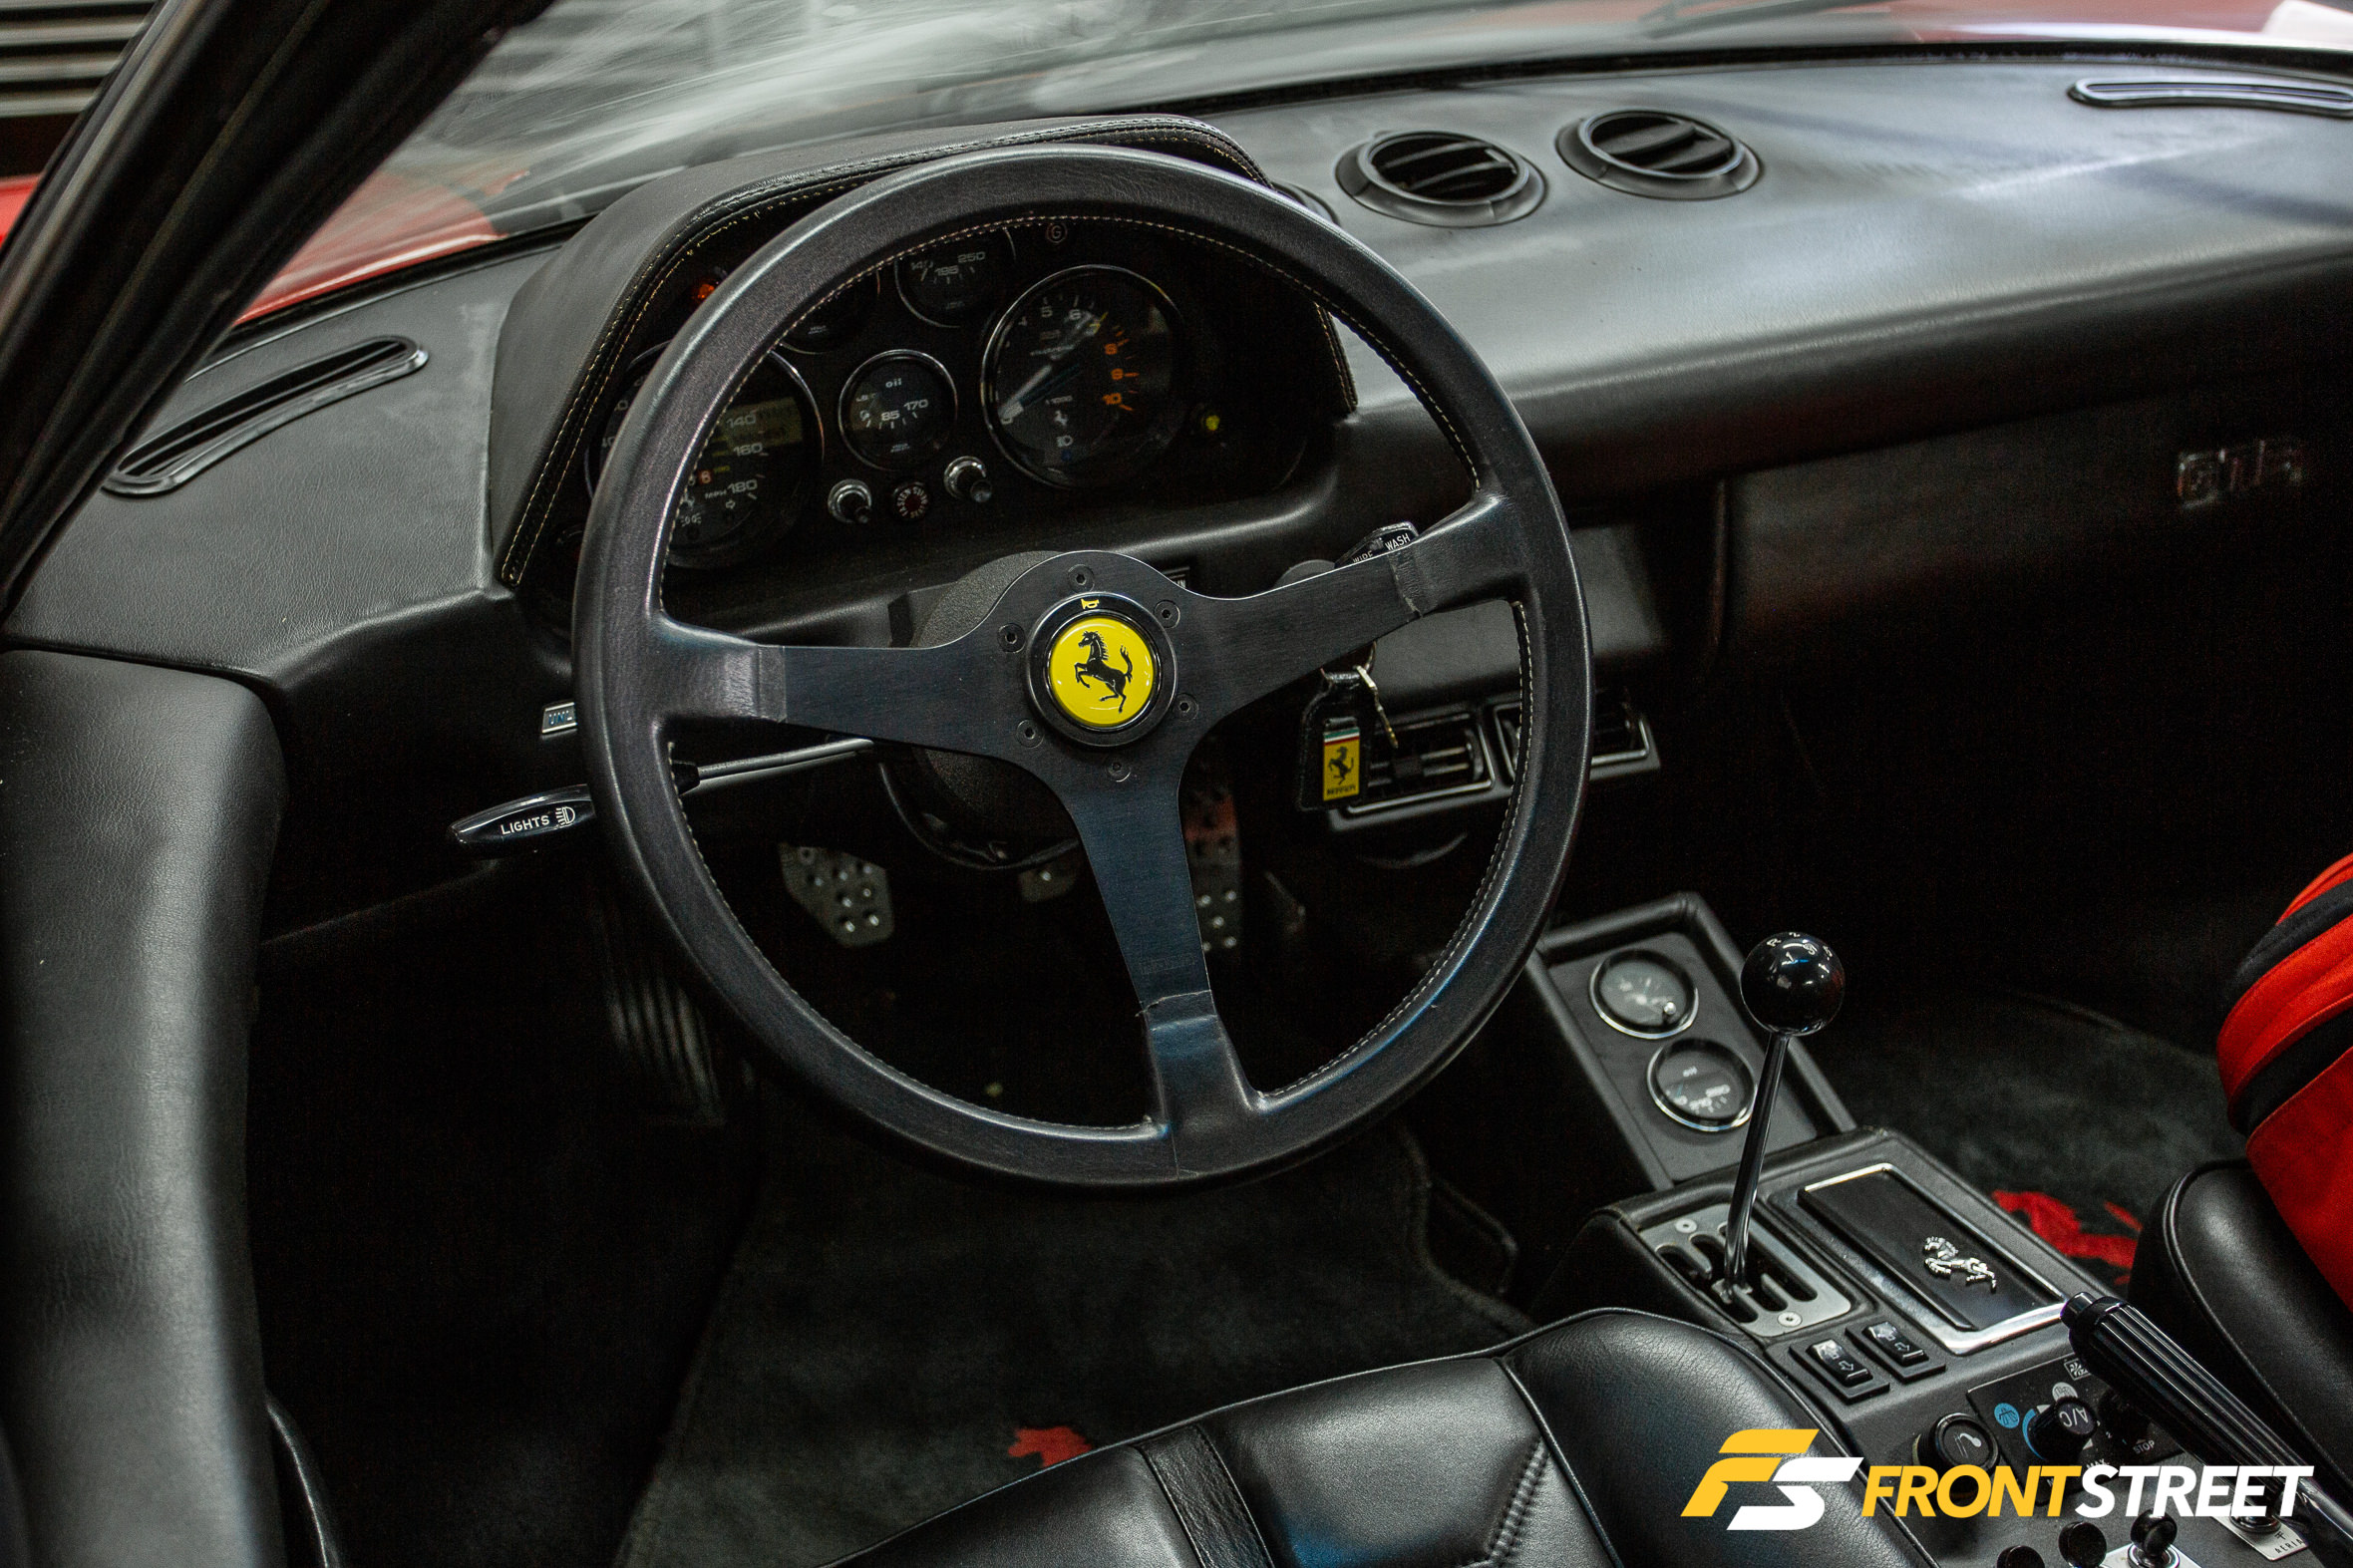 2021 Preview: Chopped-Up Ferrari 308 GTB Gears Up To Piss Off The Purists